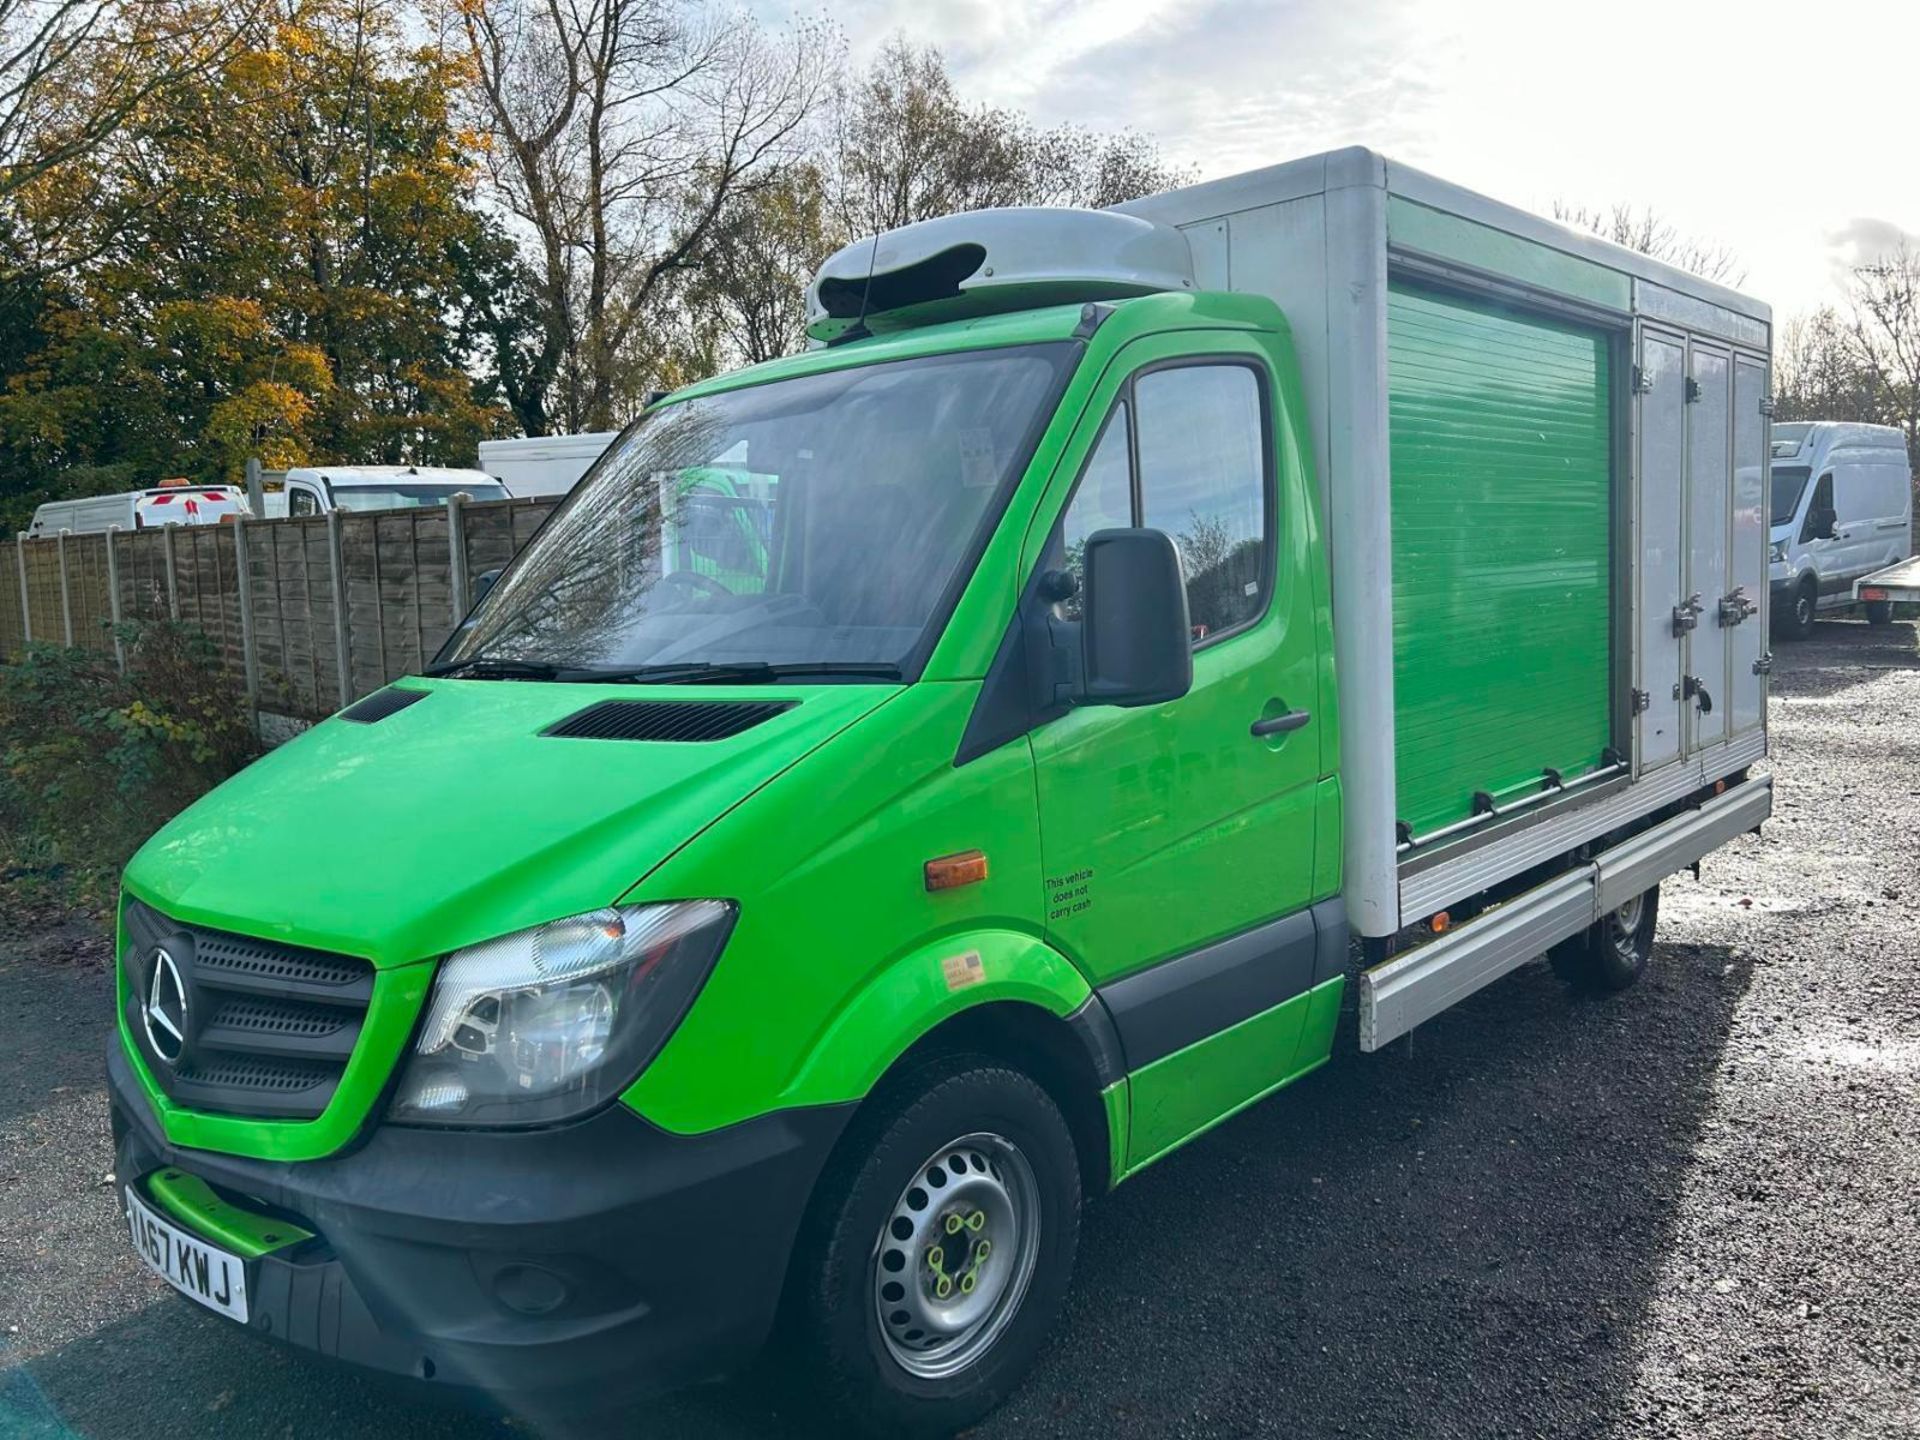 EXCEPTIONAL OPPORTUNITY: 2017 MERCEDES-BENZ SPRINTER 314 CDI FRIDGE FREEZER CHASSIS CAB